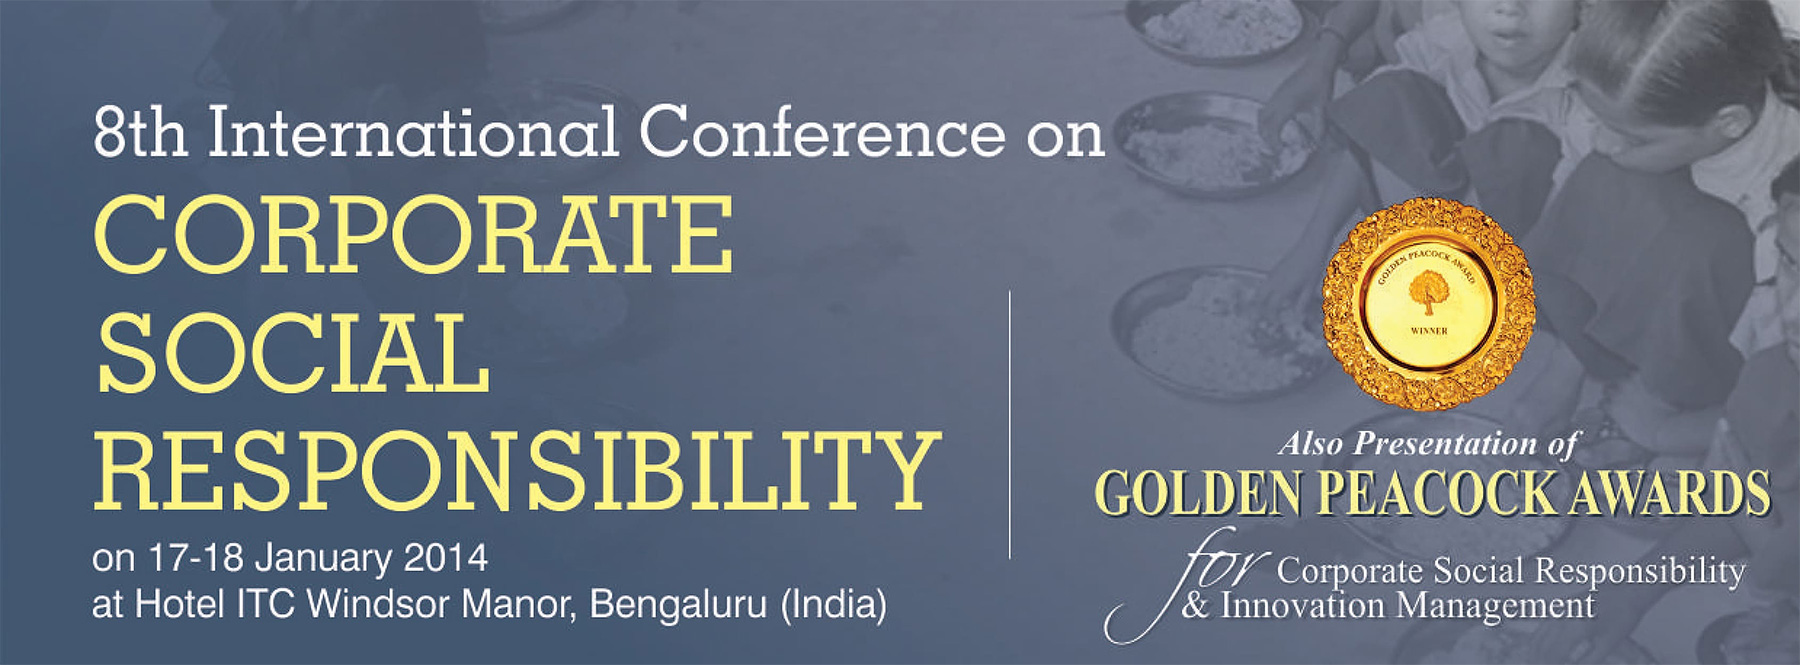 8th International Conference on Corporate Social Responsibility 2014